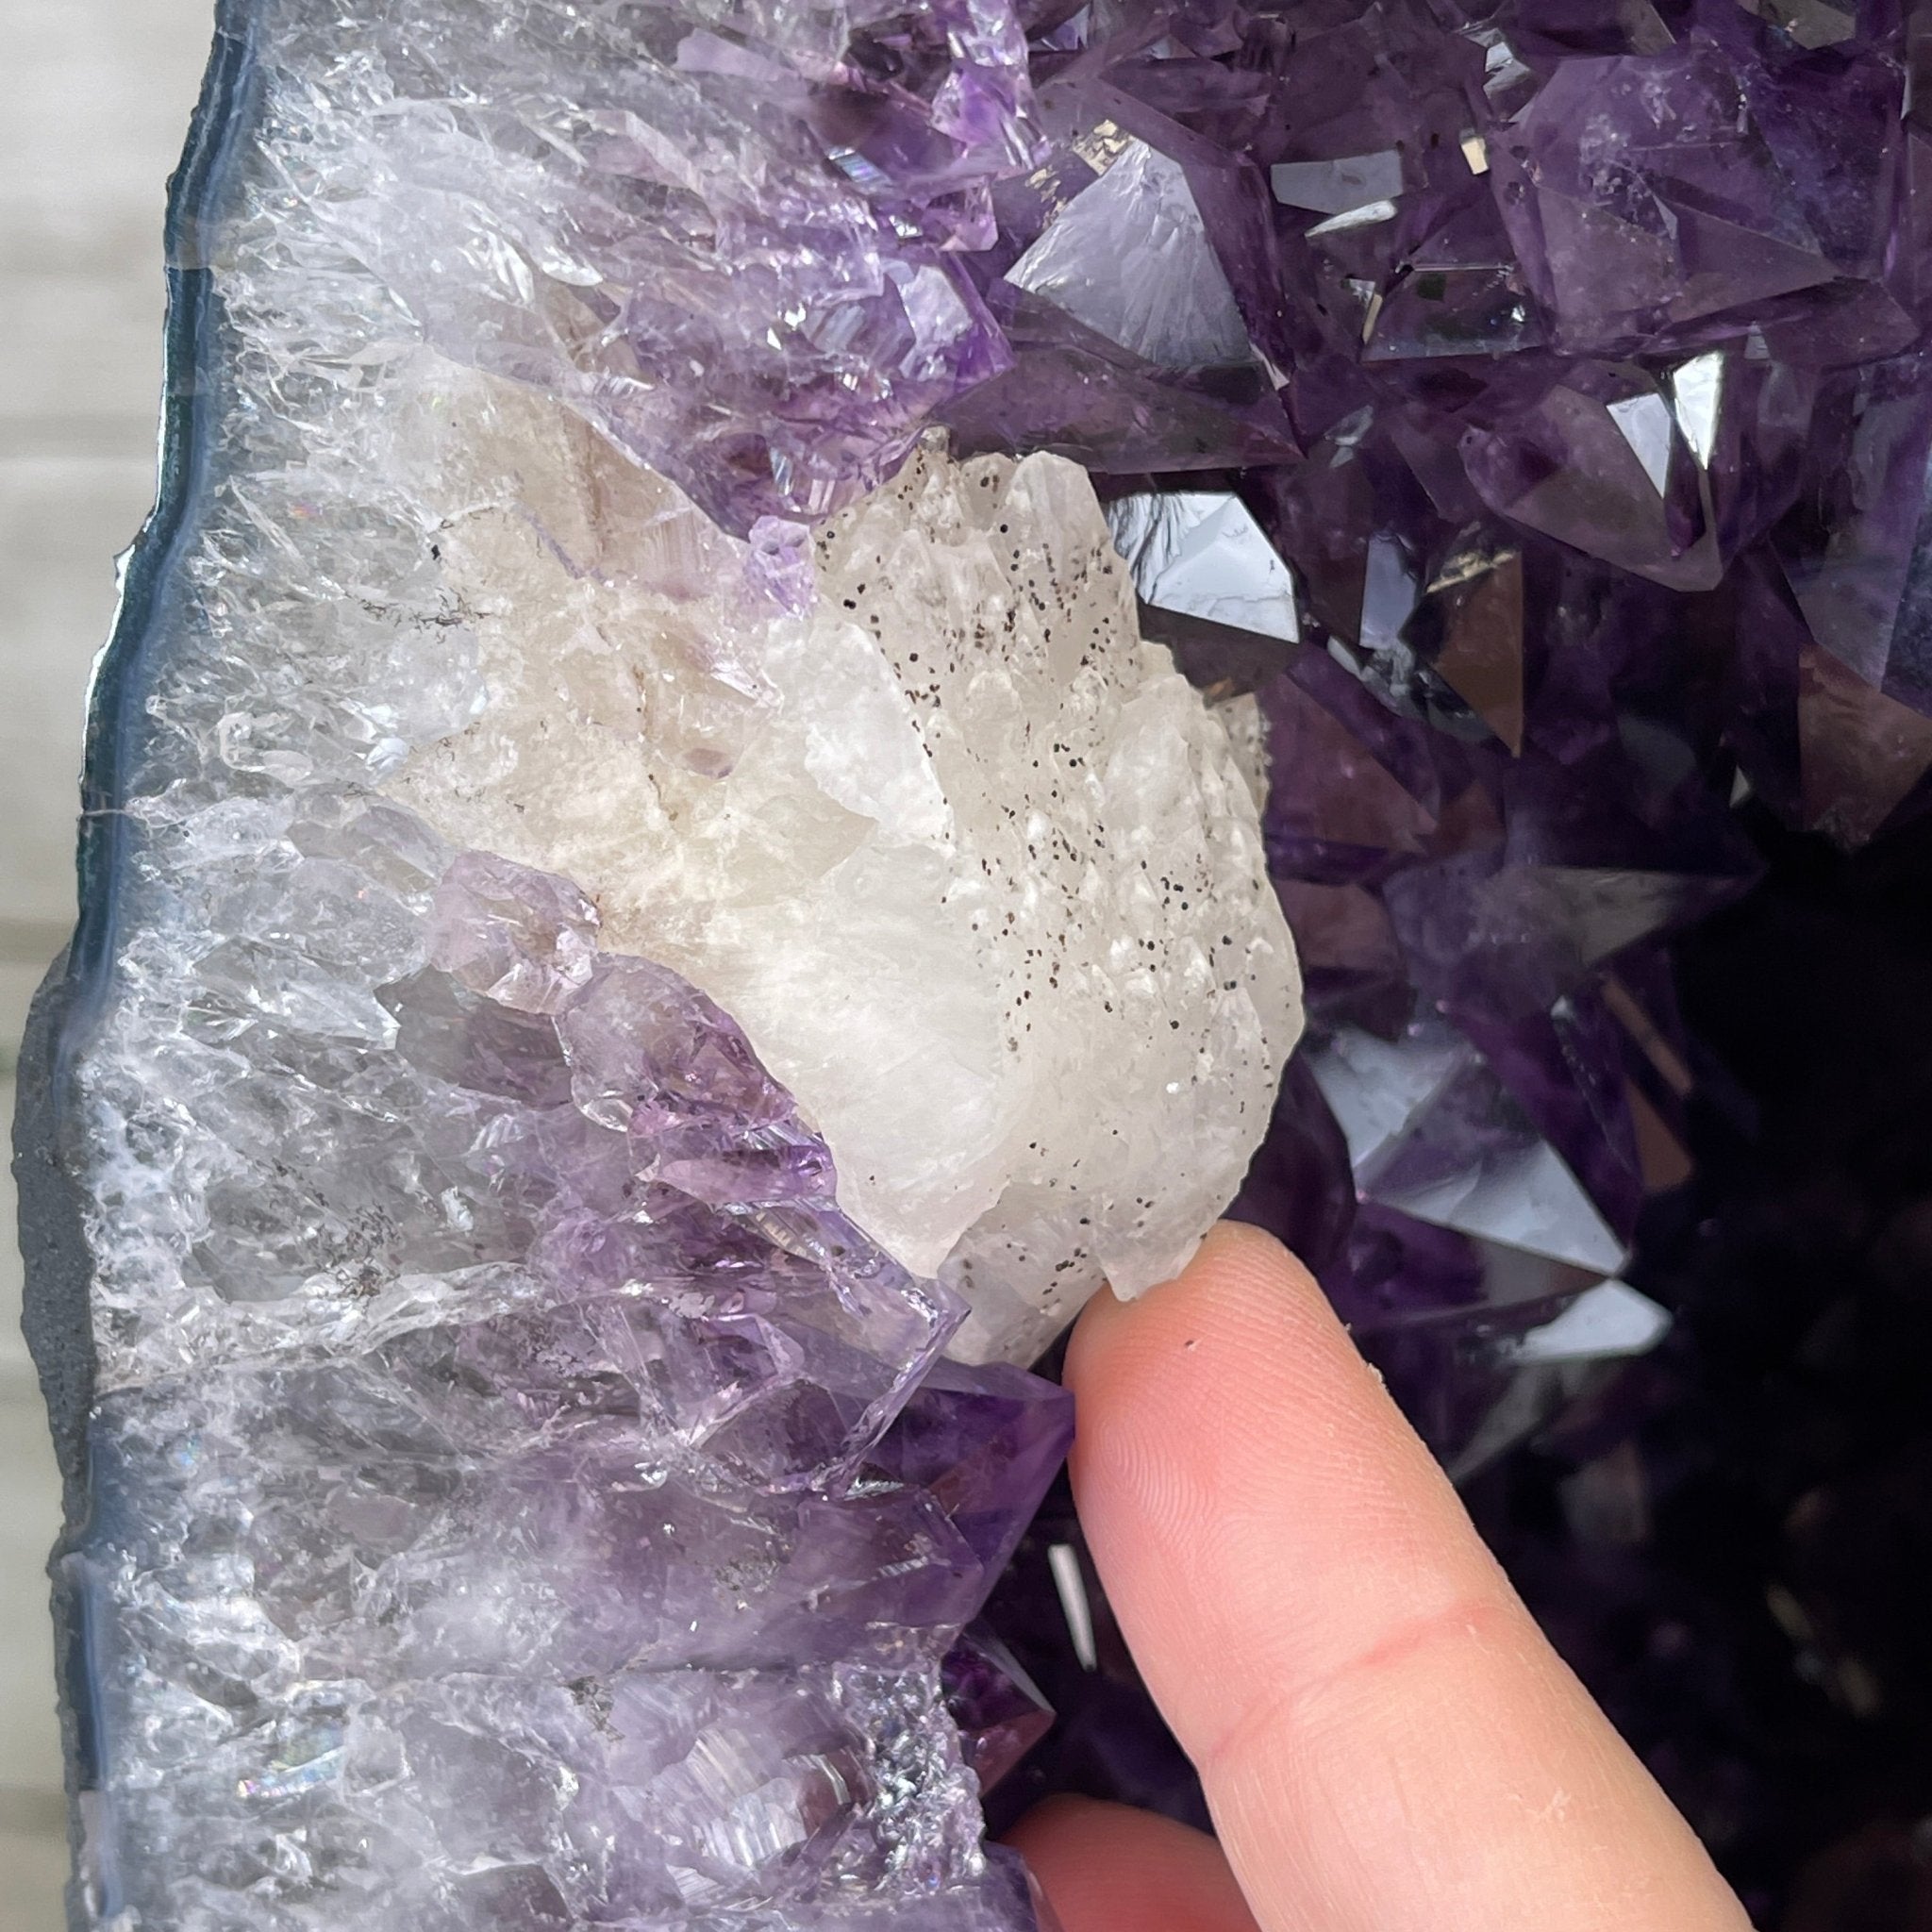 Extra Quality Brazilian Amethyst Cathedral, 16.6” tall & 47.2 lbs #5601-0526 by Brazil Gems - Brazil GemsBrazil GemsExtra Quality Brazilian Amethyst Cathedral, 16.6” tall & 47.2 lbs #5601-0526 by Brazil GemsCathedrals5601-0526